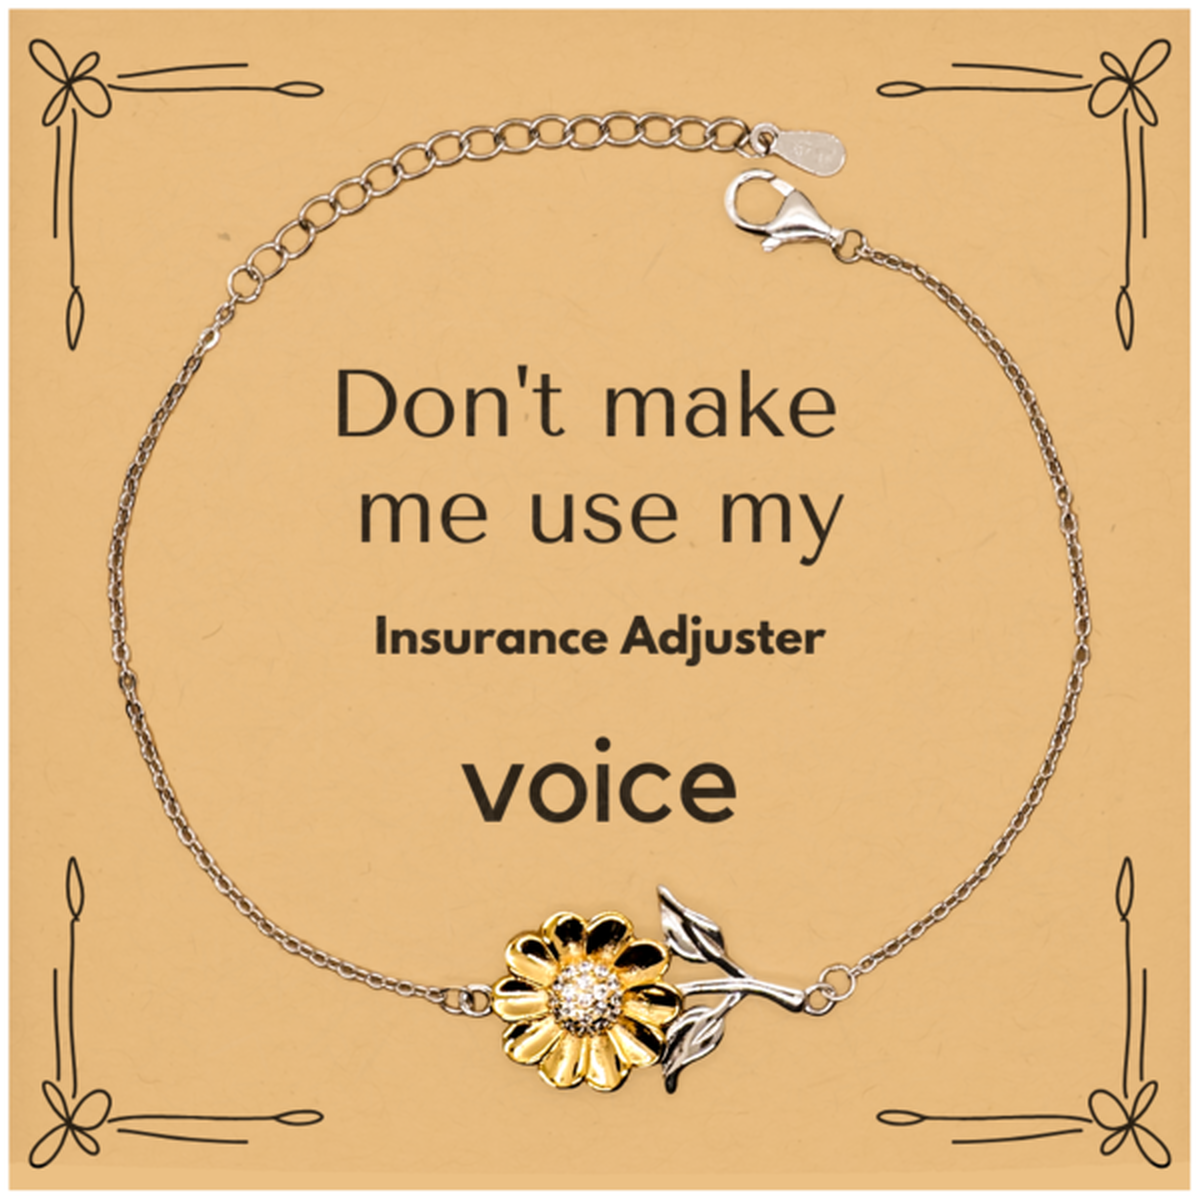 Don't make me use my Insurance Adjuster voice, Sarcasm Insurance Adjuster Card Gifts, Christmas Insurance Adjuster Sunflower Bracelet Birthday Unique Gifts For Insurance Adjuster Coworkers, Men, Women, Colleague, Friends